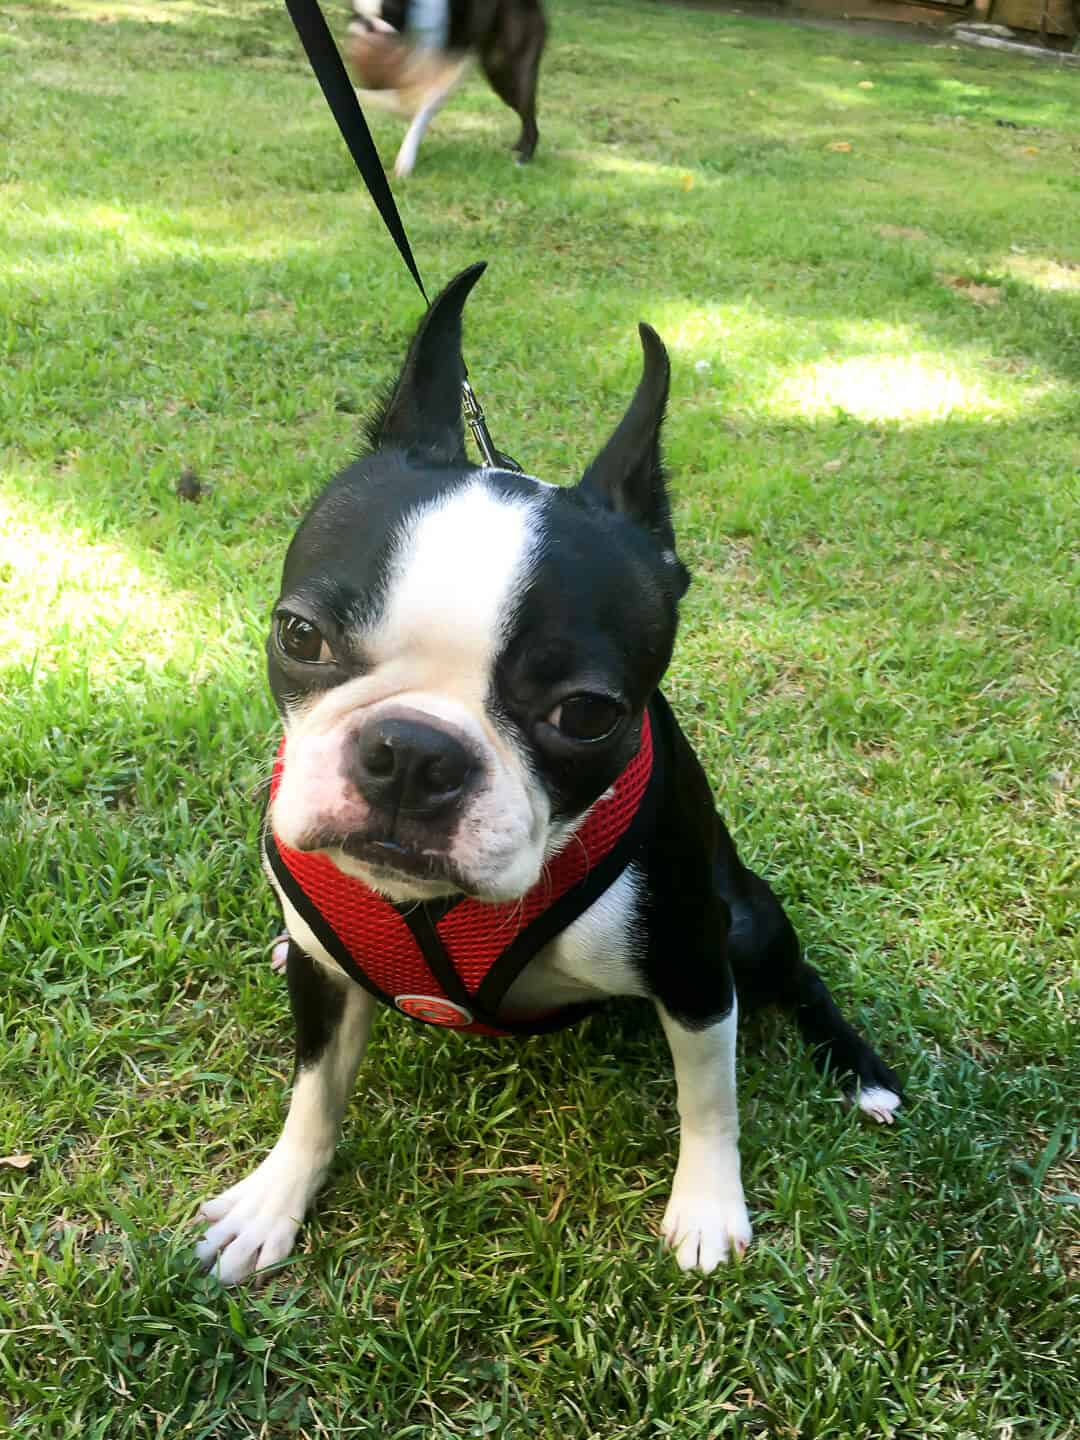 Lexie the Boston Terrier wearing a red harness on the grass in the backyard of her new home.